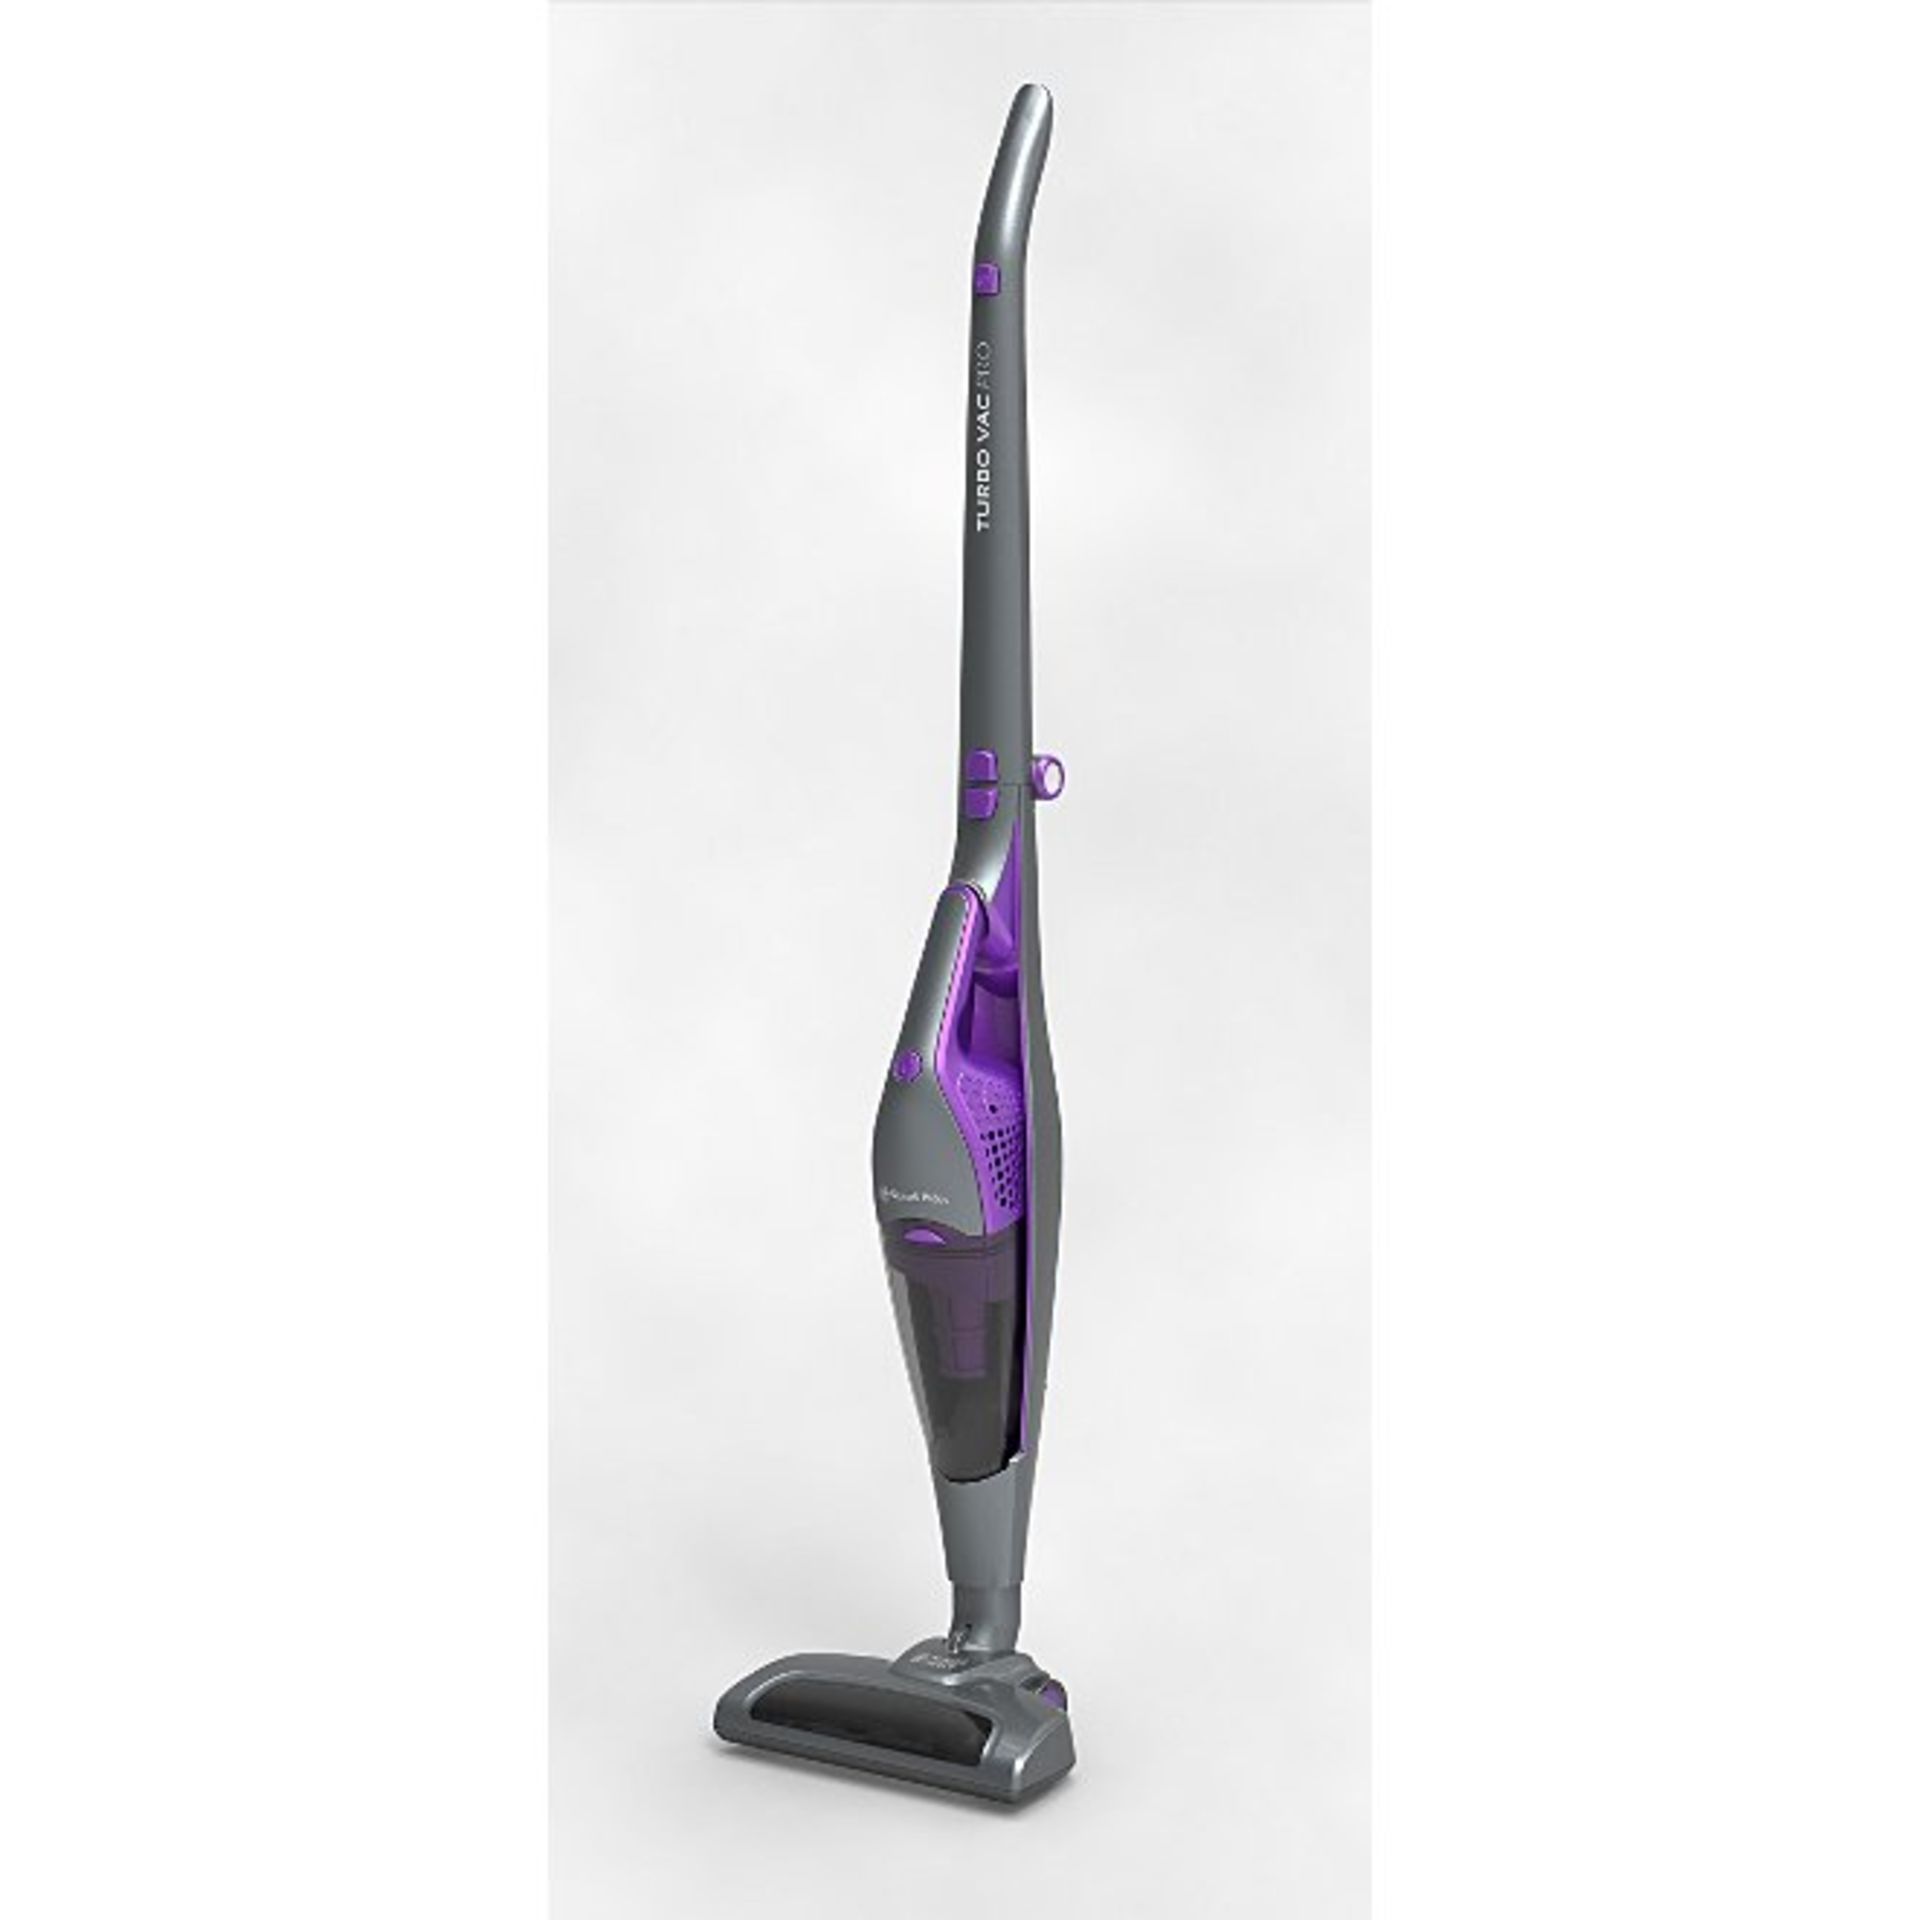 UNBOXED RUSSELL HOBBS TURBO VAC PRO CORDLESS VACUUM CLEANER RRP £110.00Condition ReportAppraisal